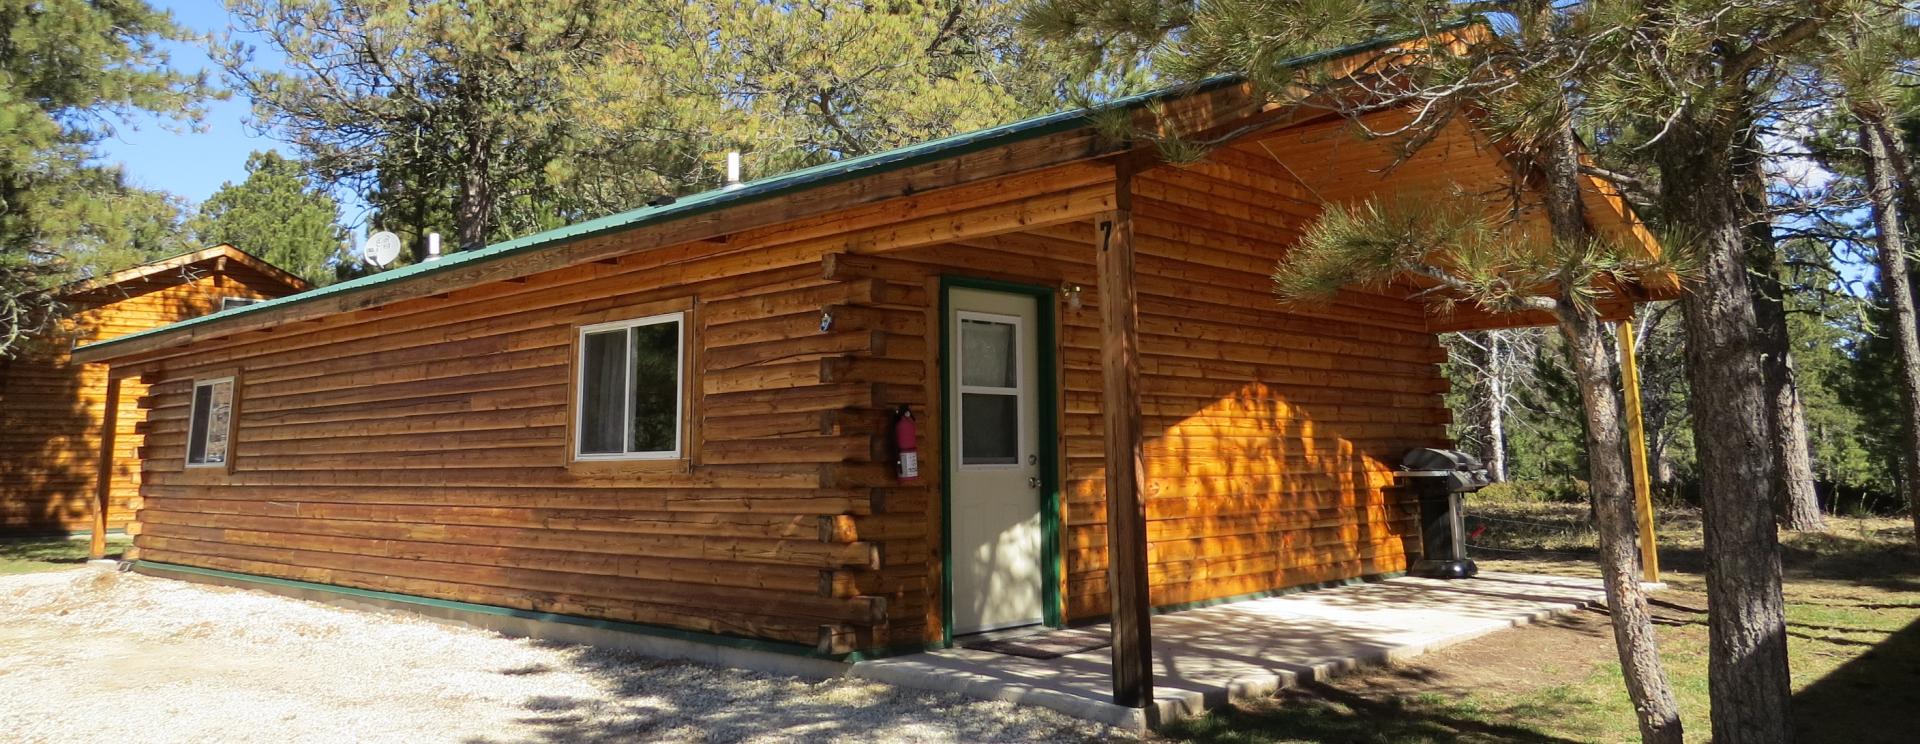 Mystic Hills Hideaway Campground & Cabins